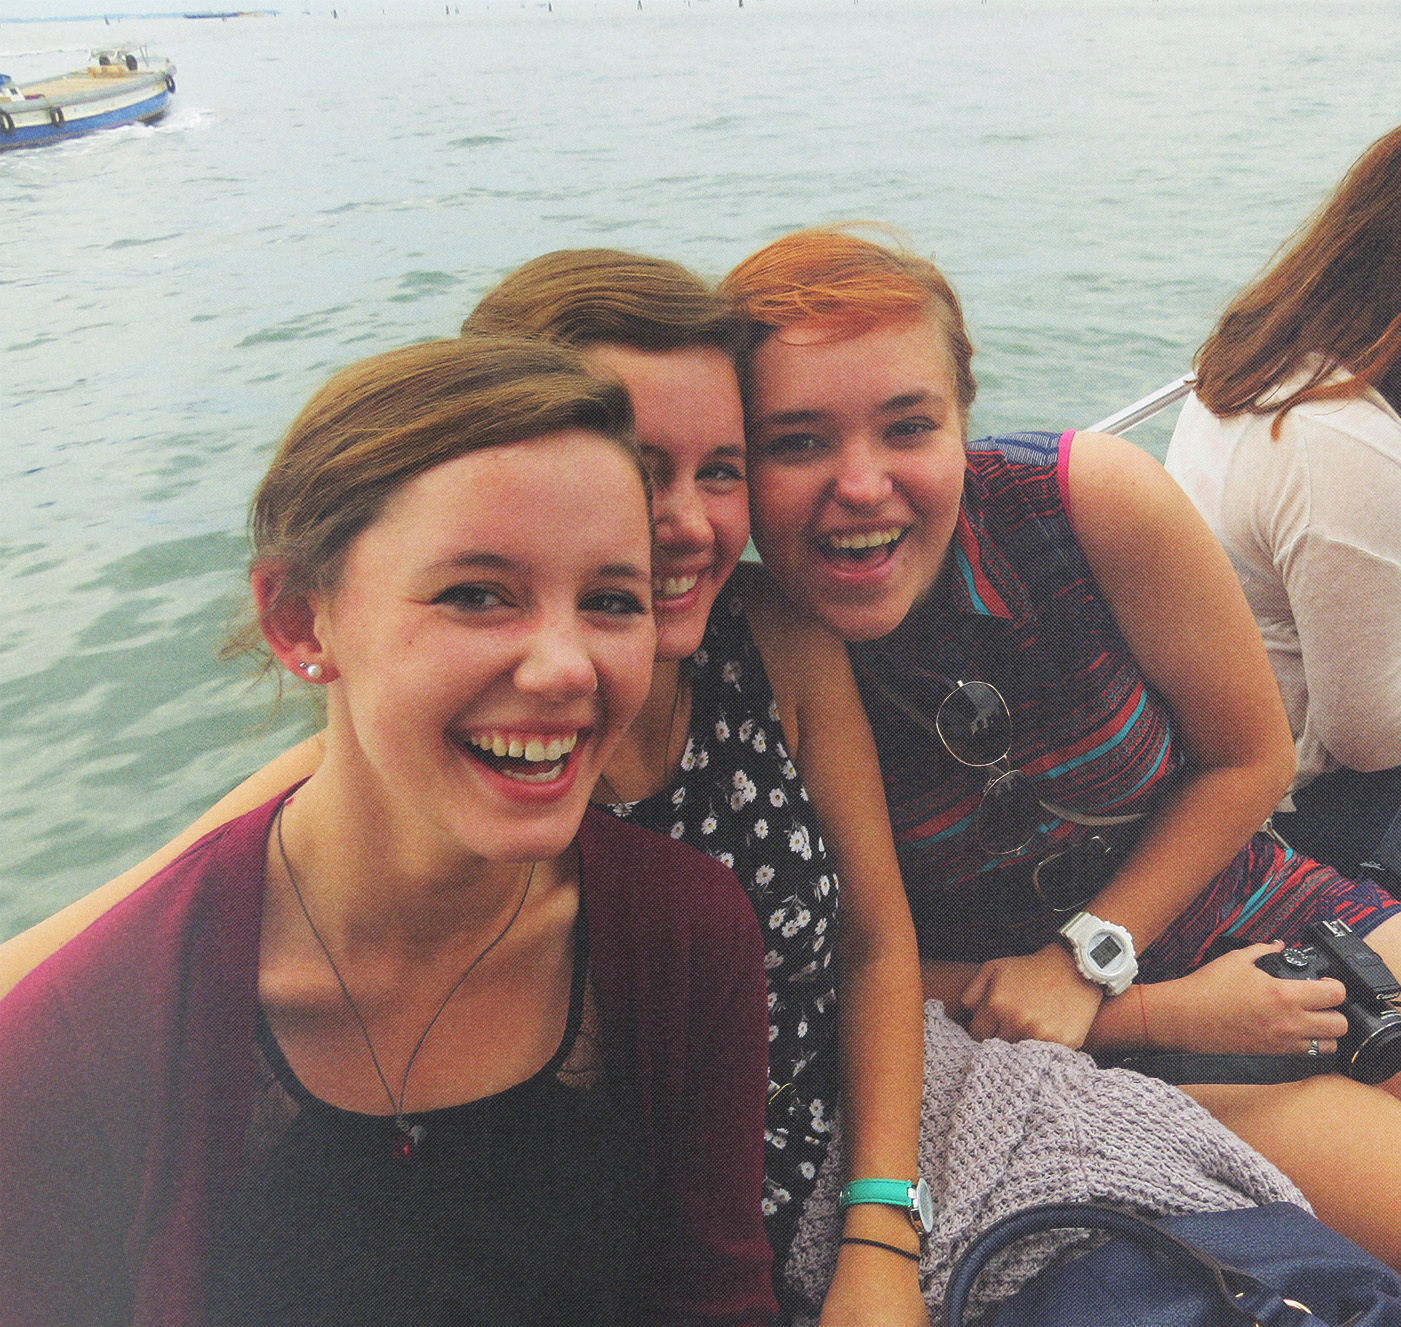 Students on a boat in Venice, particularly picturesque for one of Richard's most memorable teaching moments.